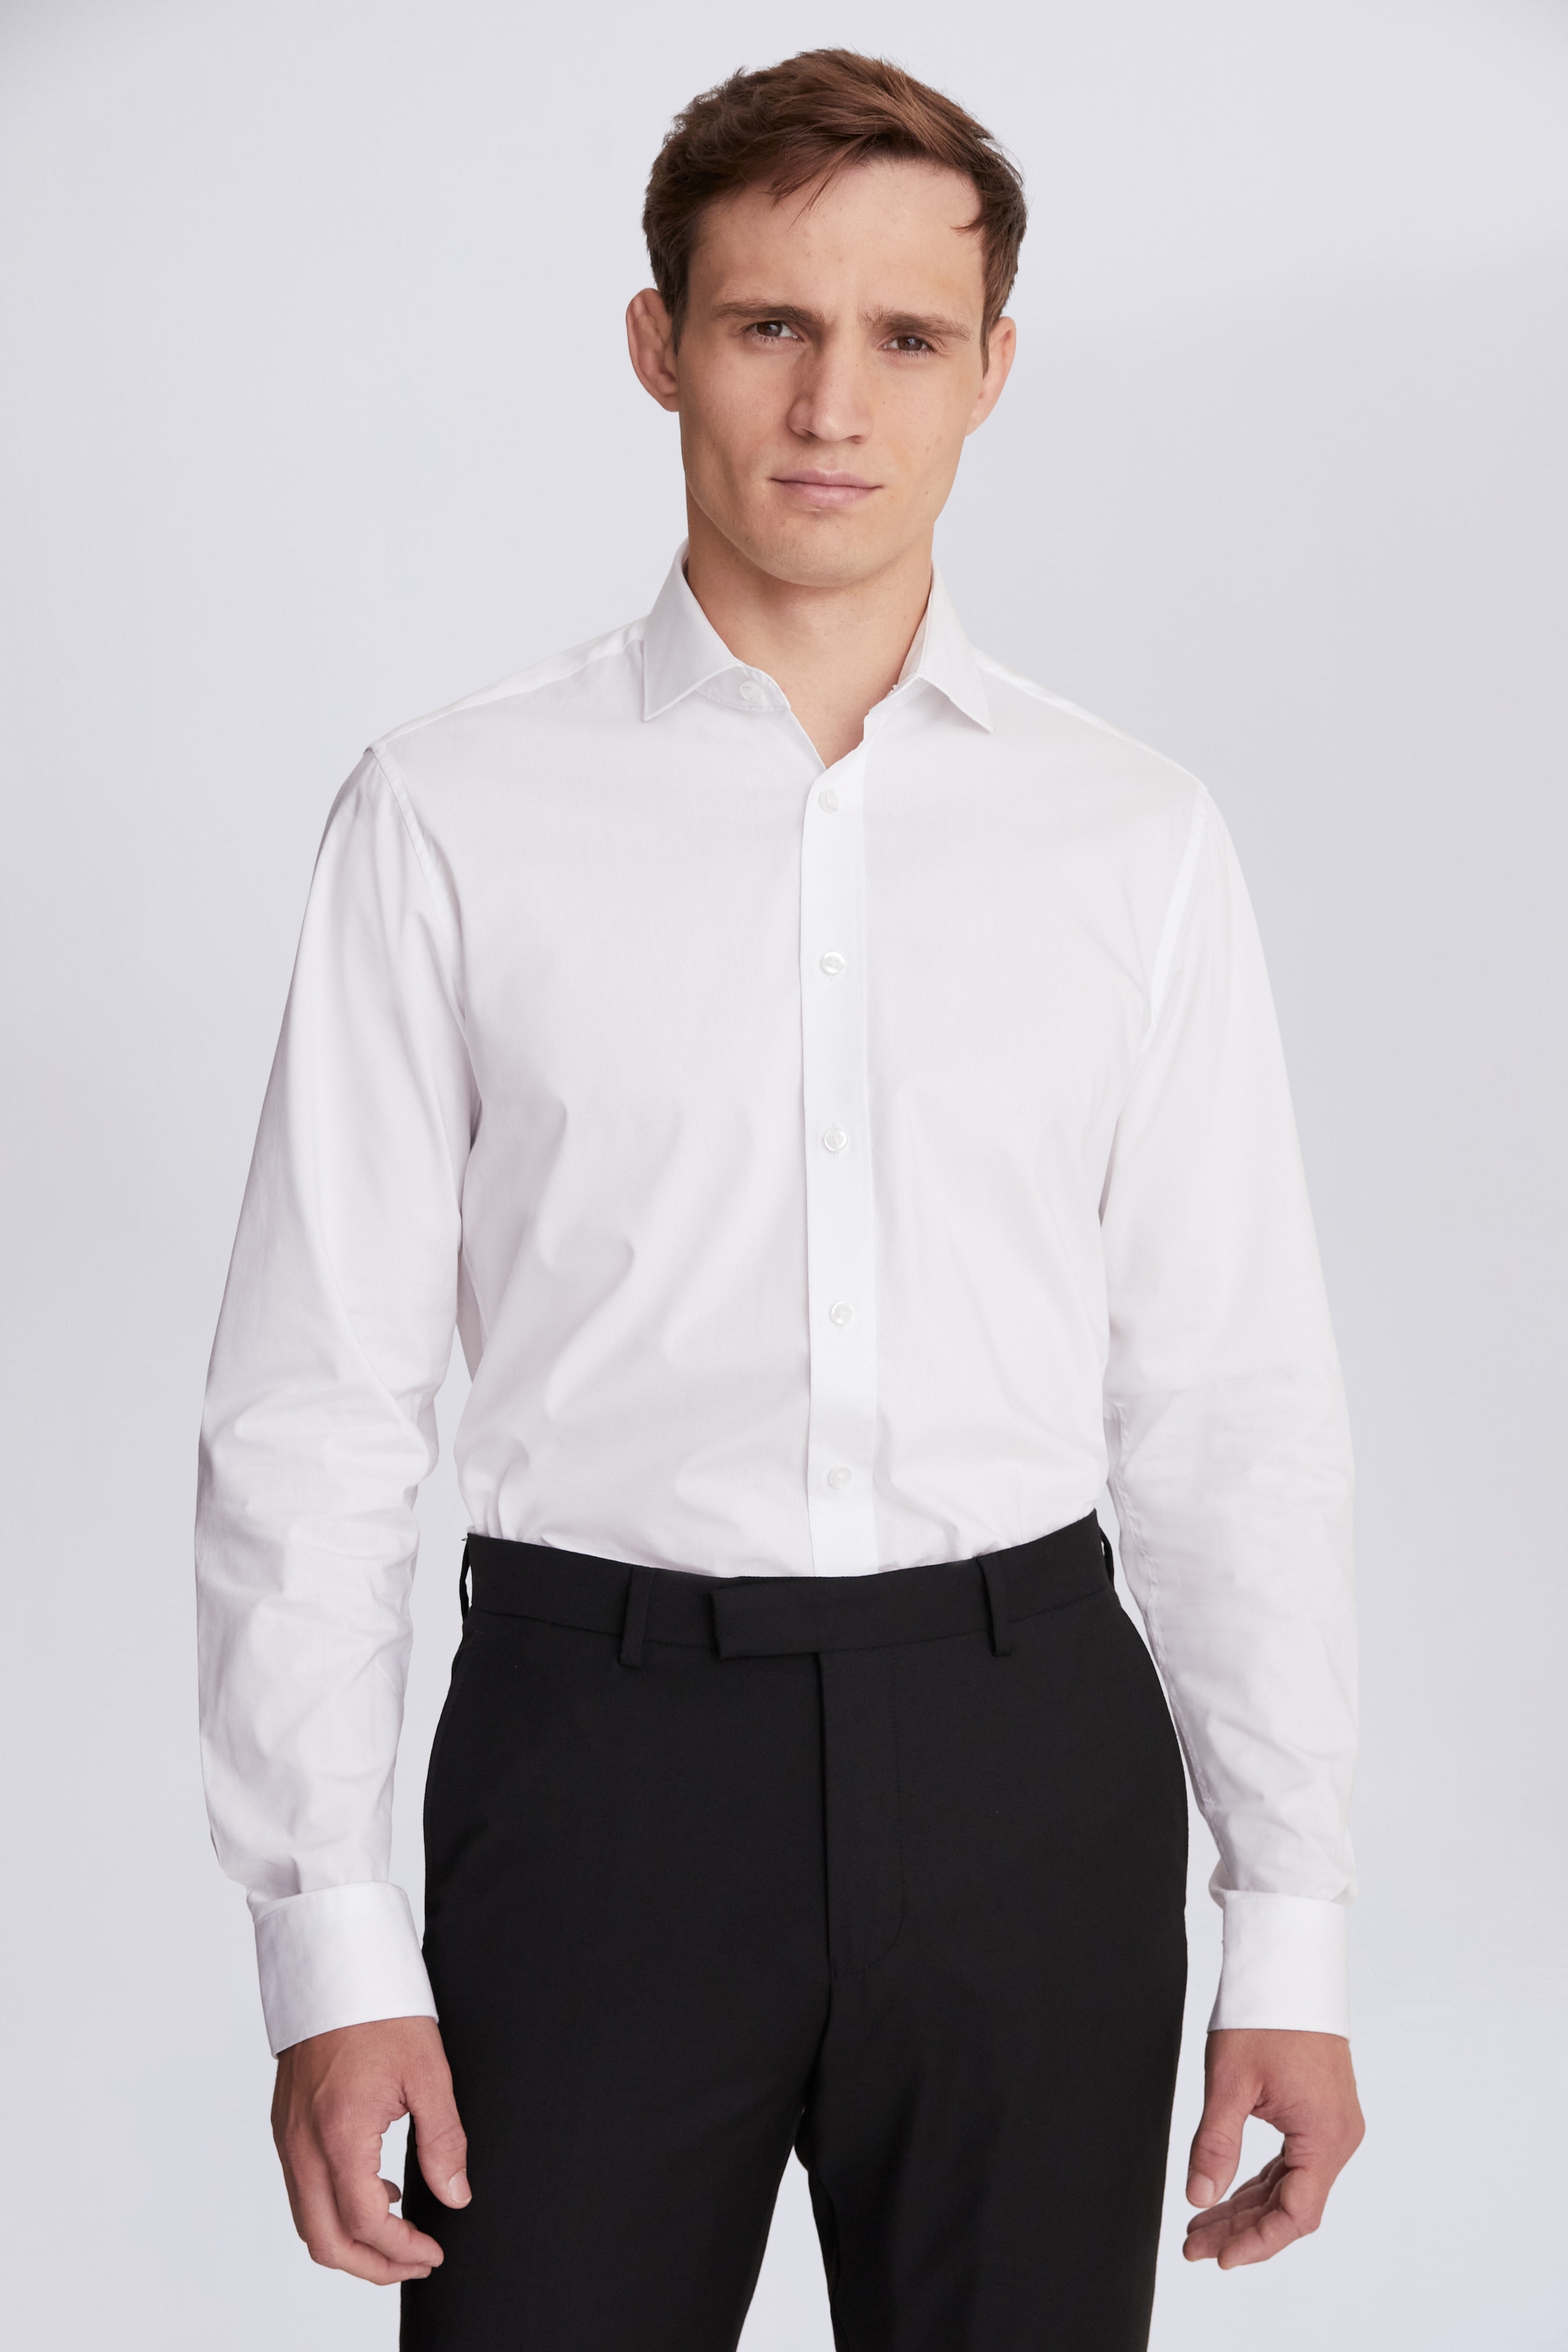 Tailored Fit White Stretch Shirt | Buy Online at Moss